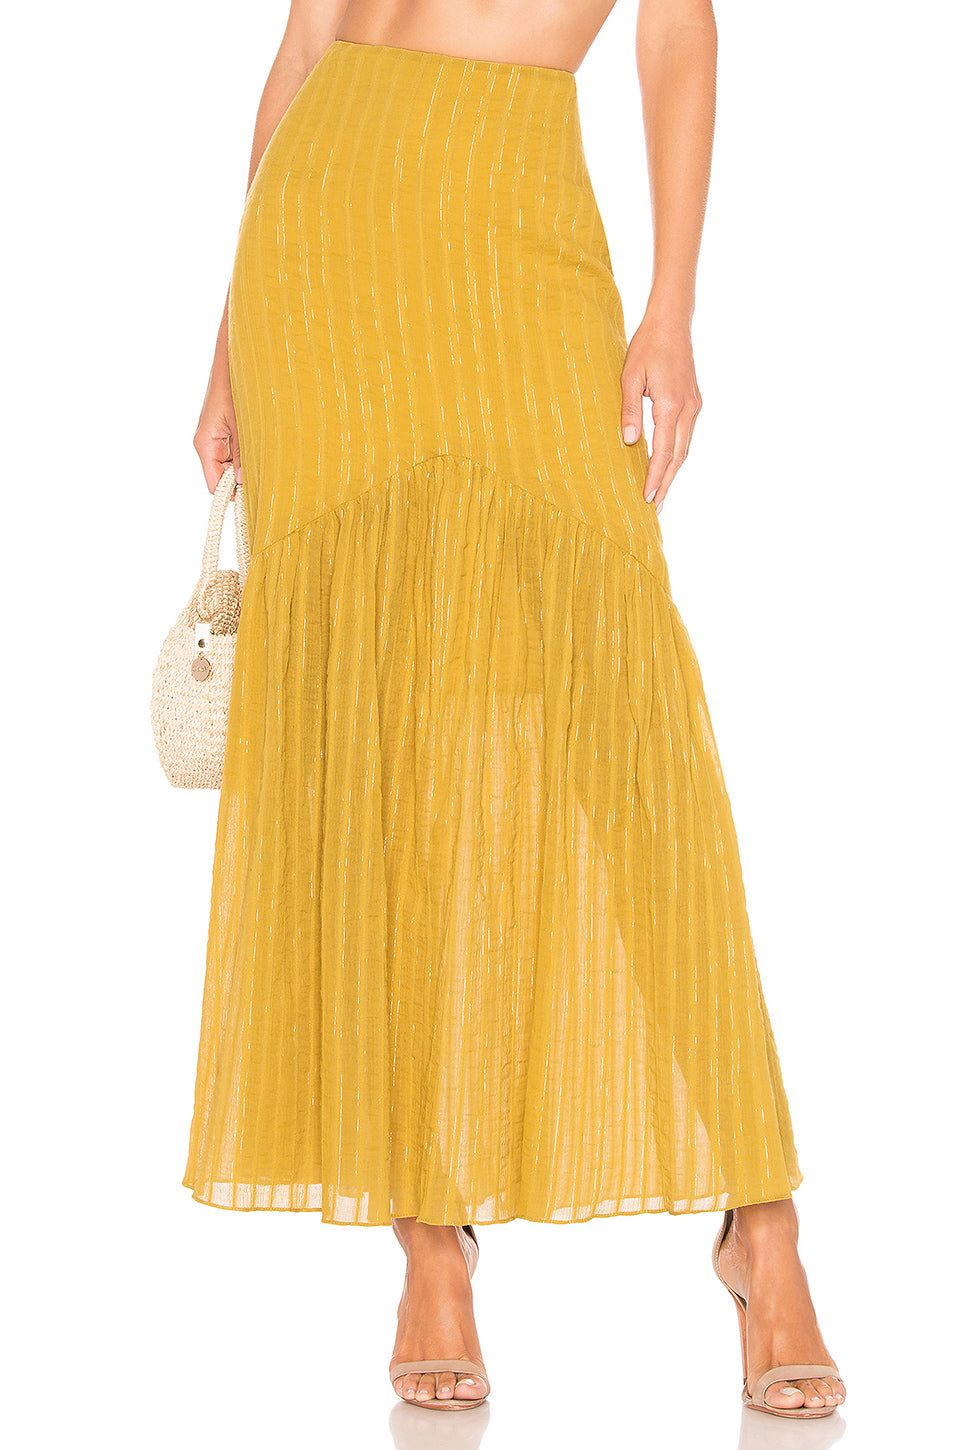 Cameron Skirt in PEAR YELLOW